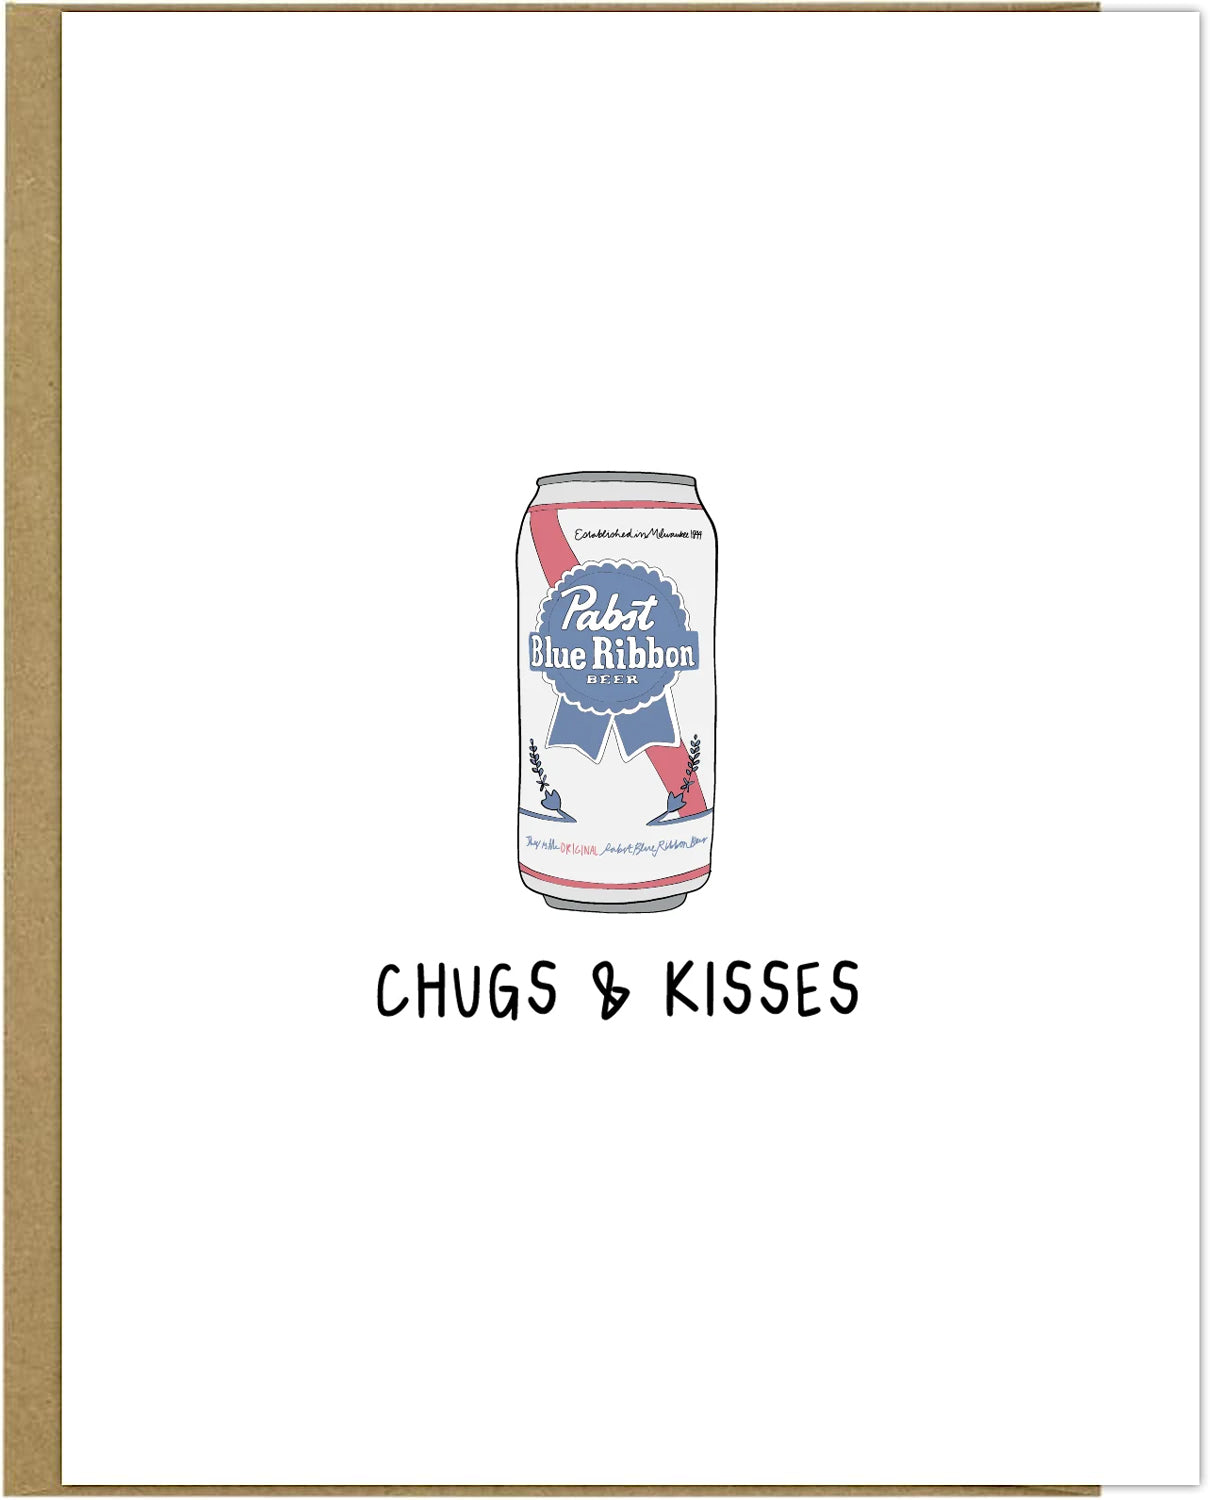 An envelope containing a rockdoodles Chugs & Kisses card featuring a can of beer.